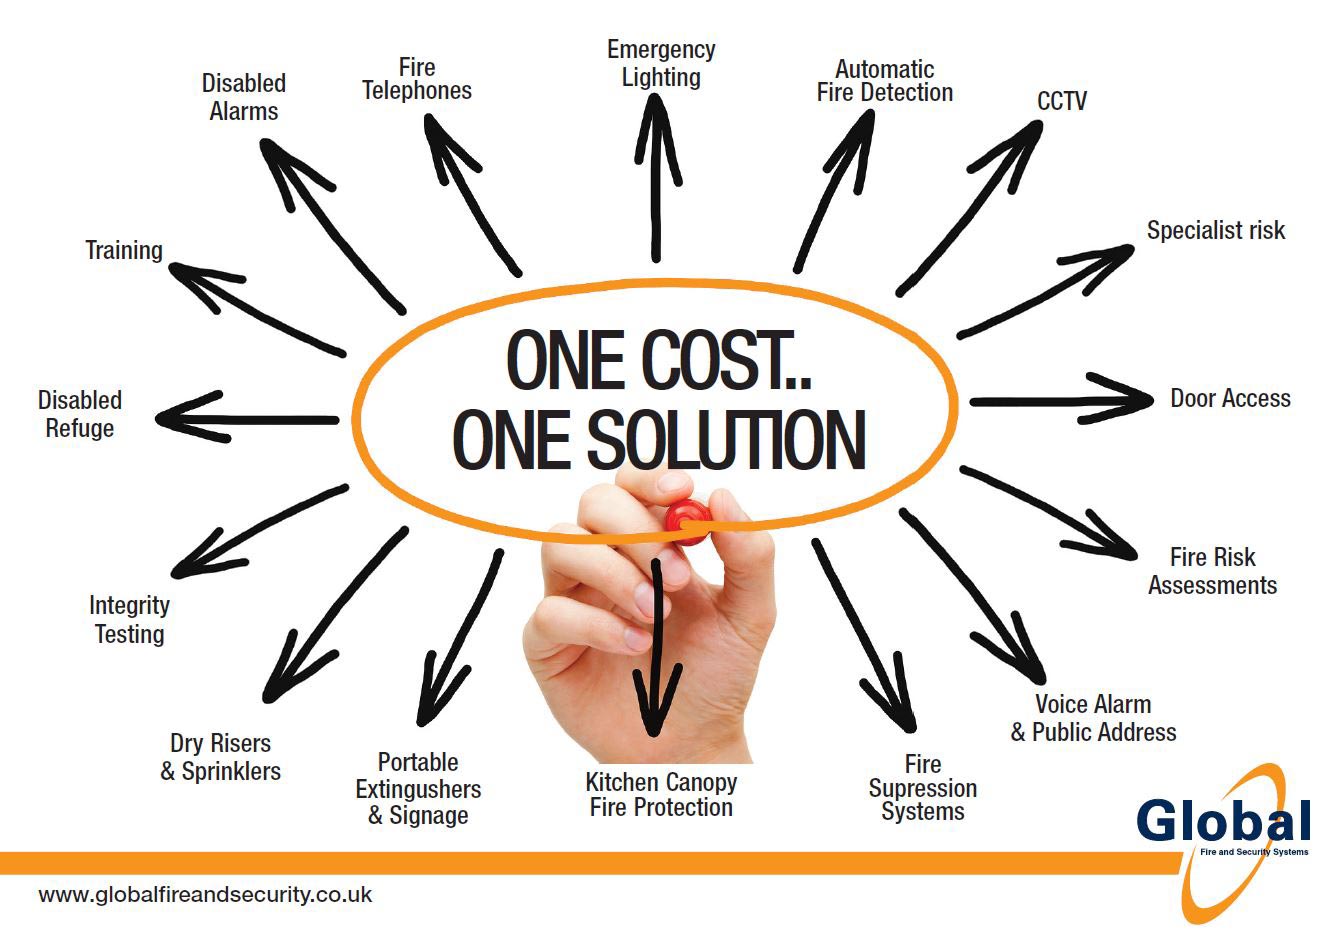 One Cost Solution